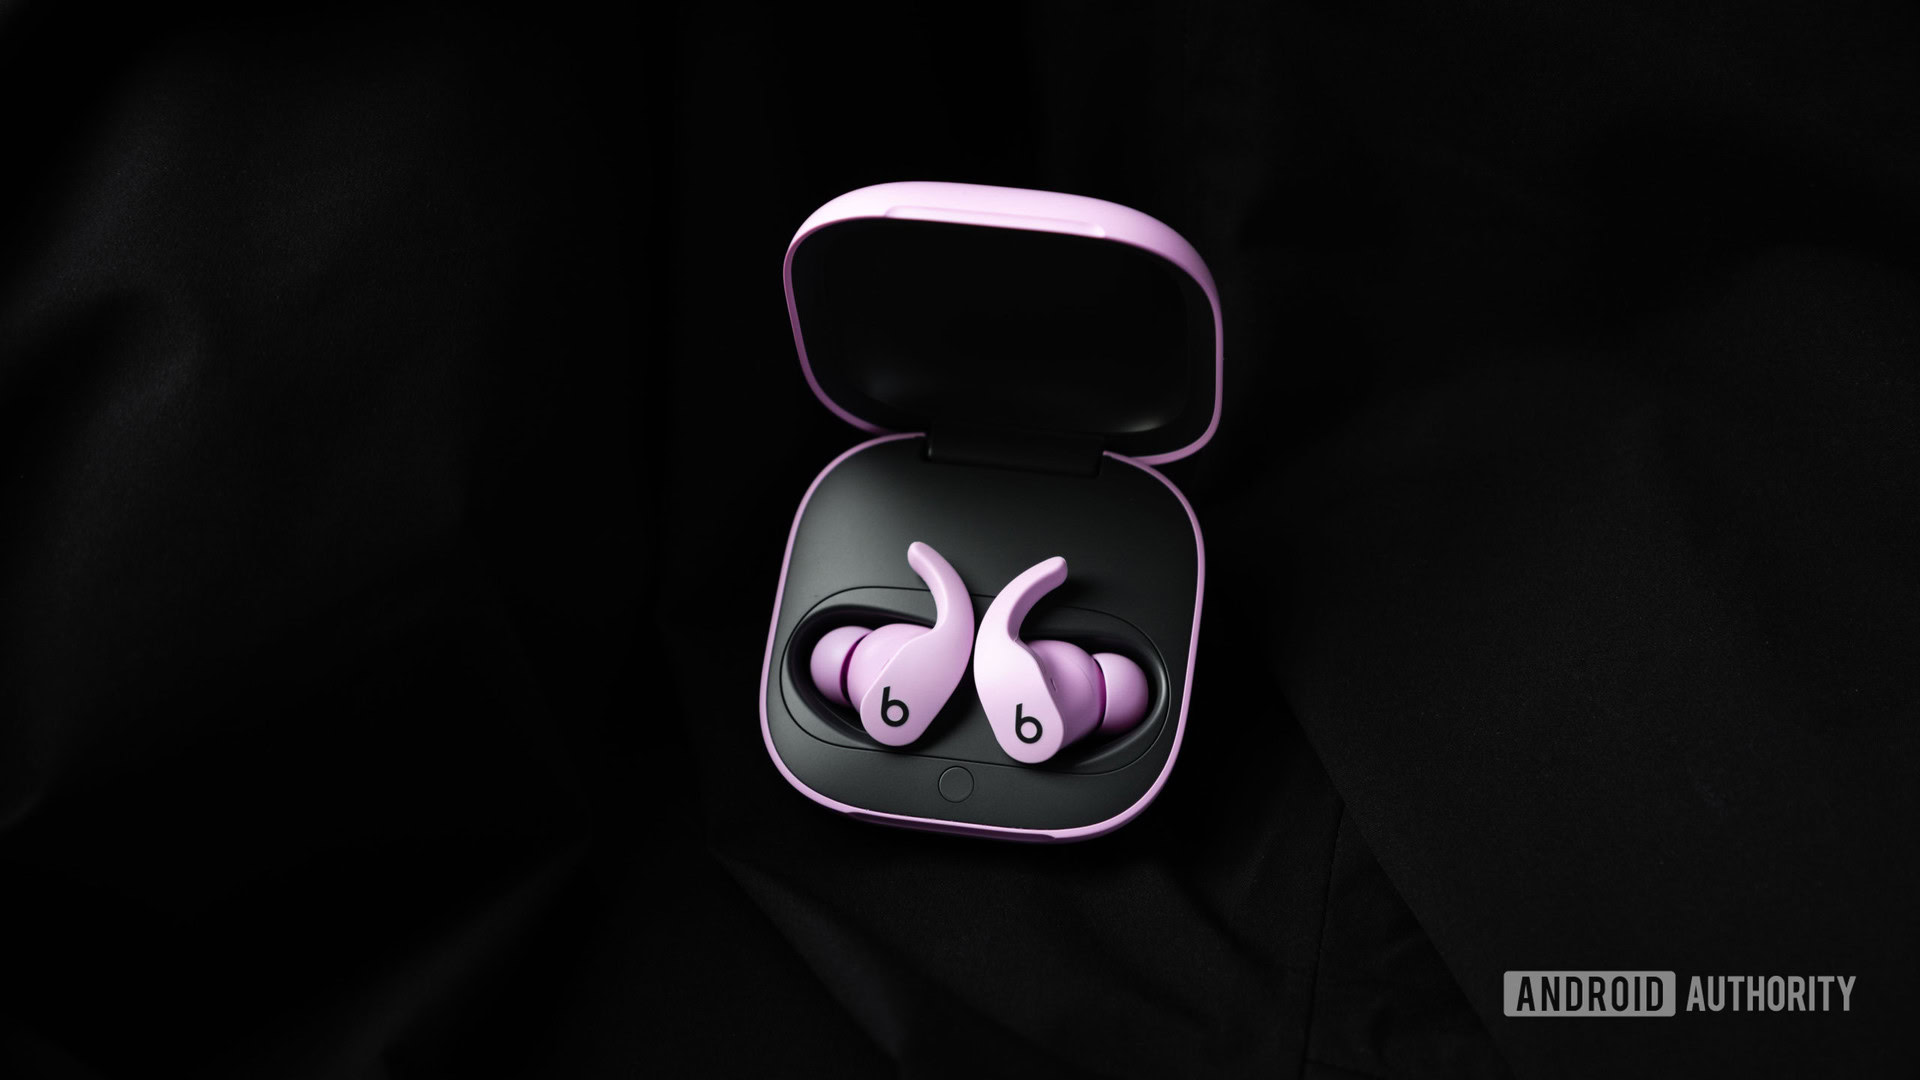 The Beats Fit Pro noise cancelling true wireless earbuds in purple lay in the open charging case against a black fabric background.